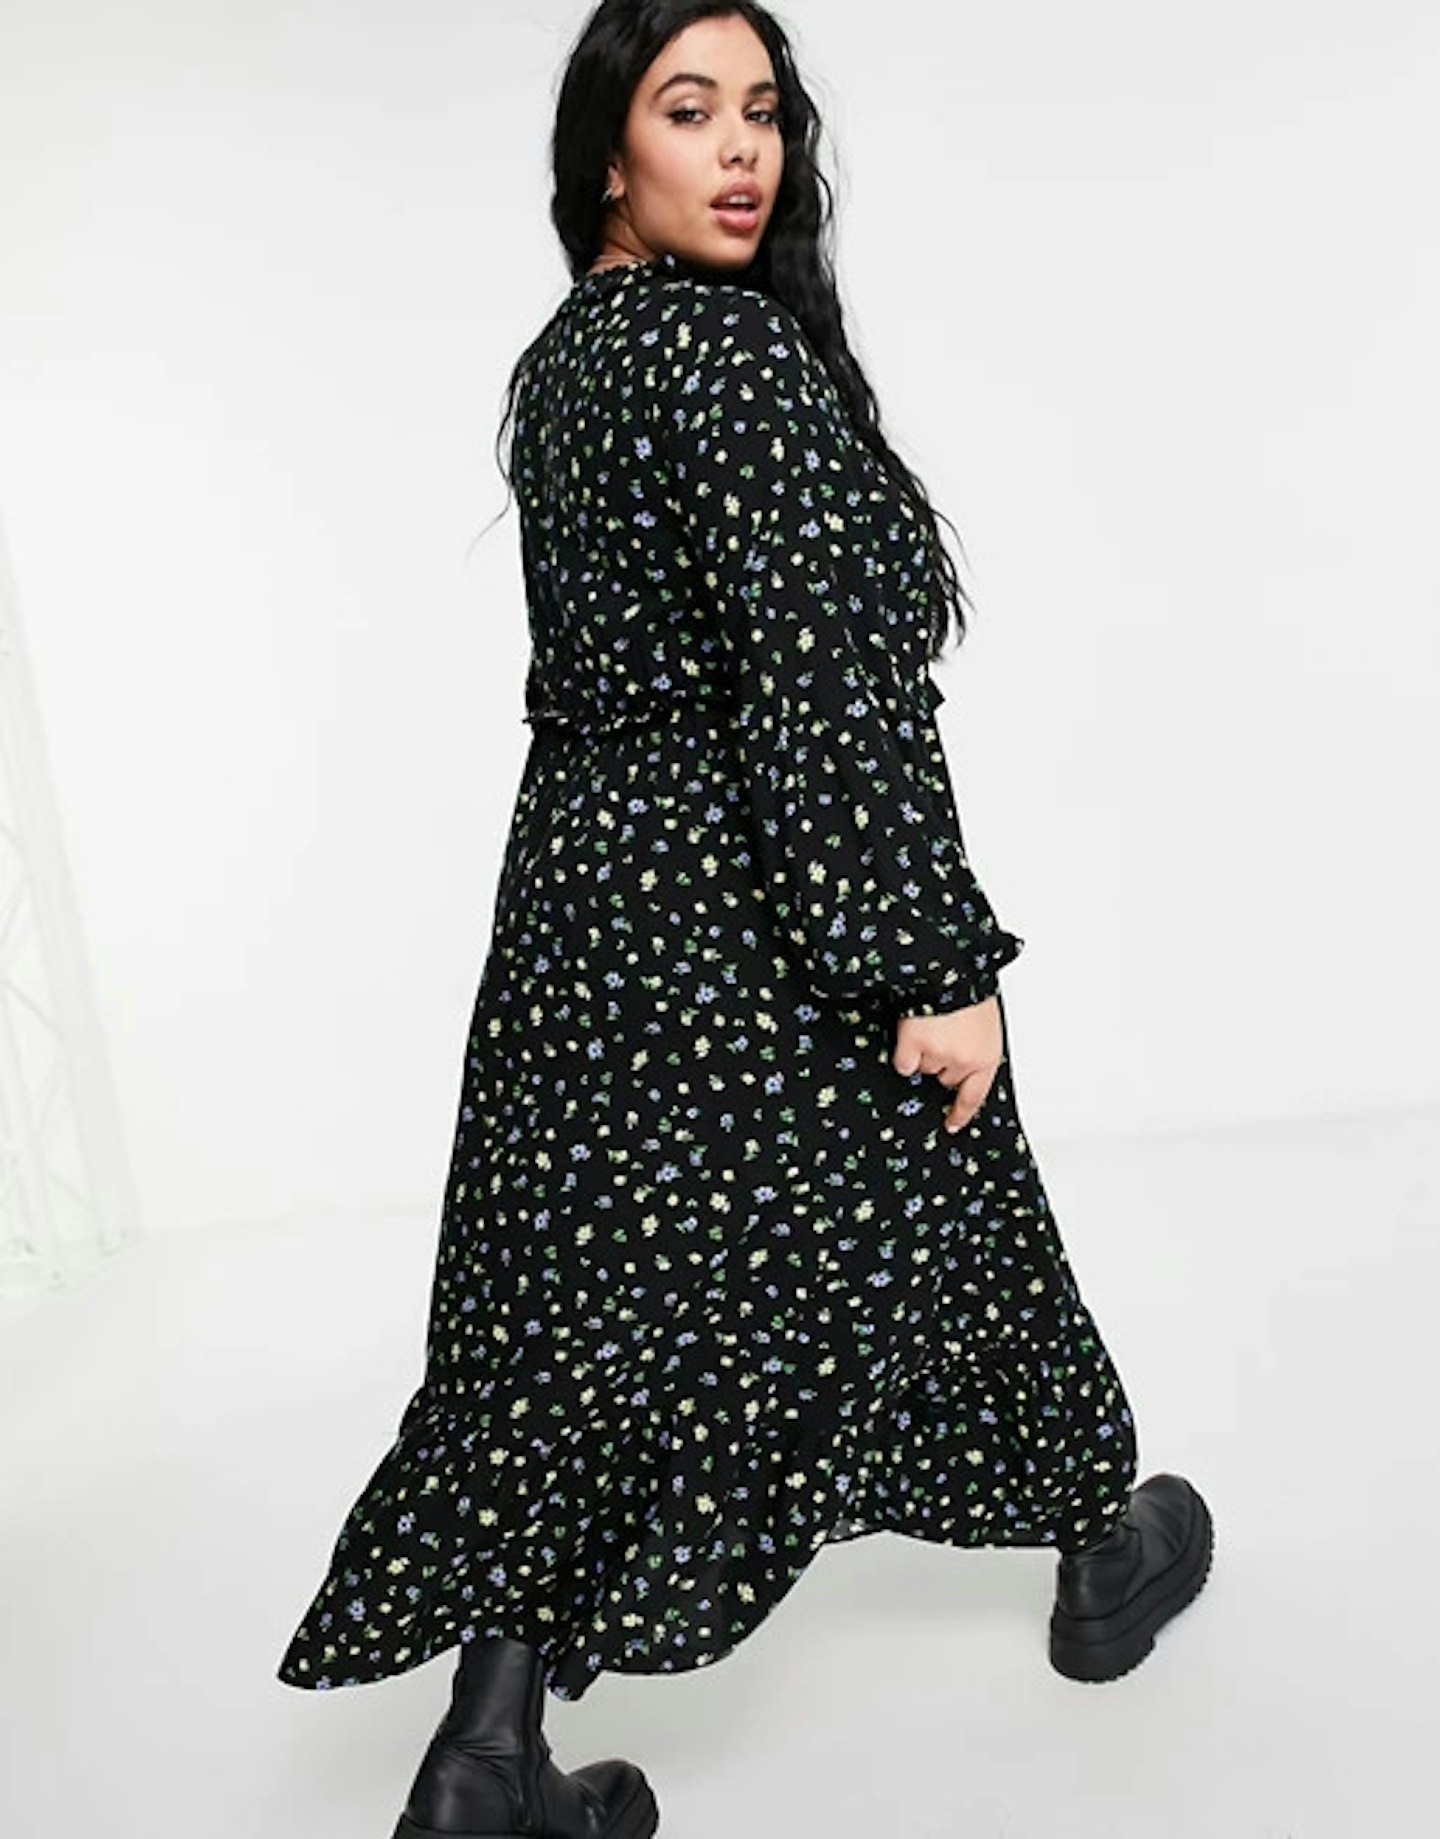 New Look Curve at ASOS, long sleeve tie neck frill detail smock in black pattern, £22.99